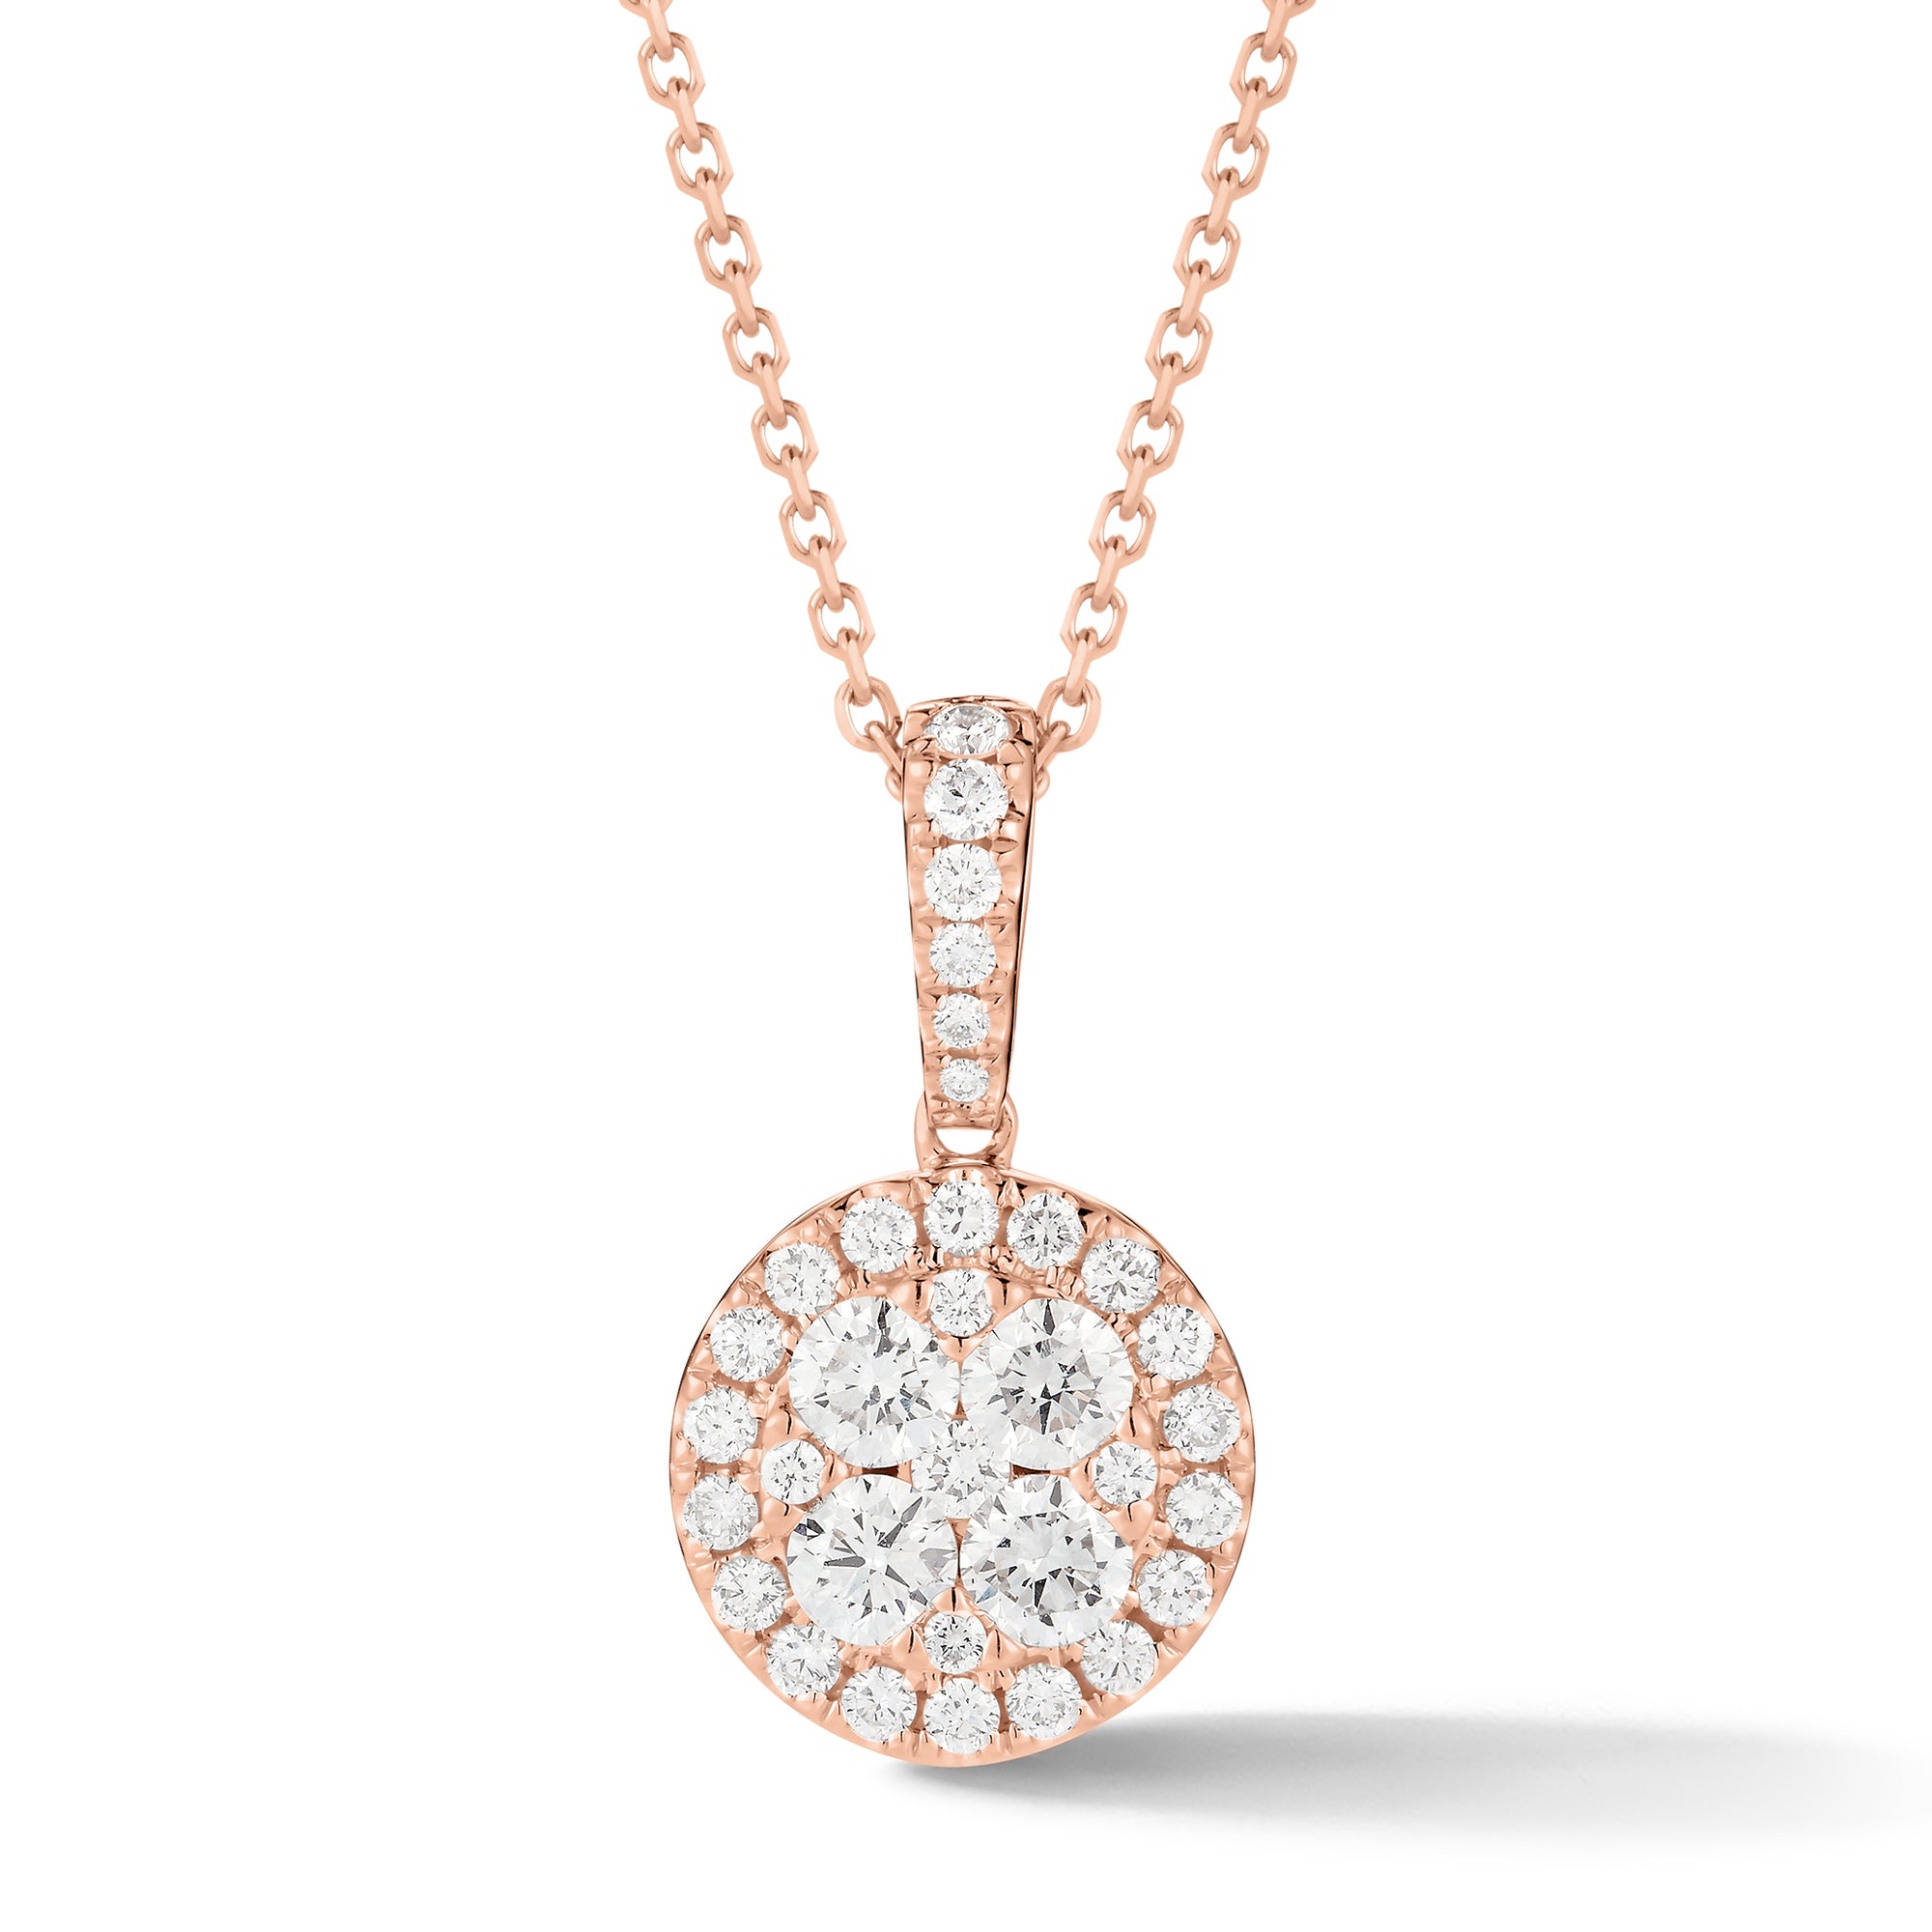 Diamond Halo Cluster Pendant Necklace  -18K gold weighing 3.70 grams  -33 round prong-set diamonds totaling 0.81 carats